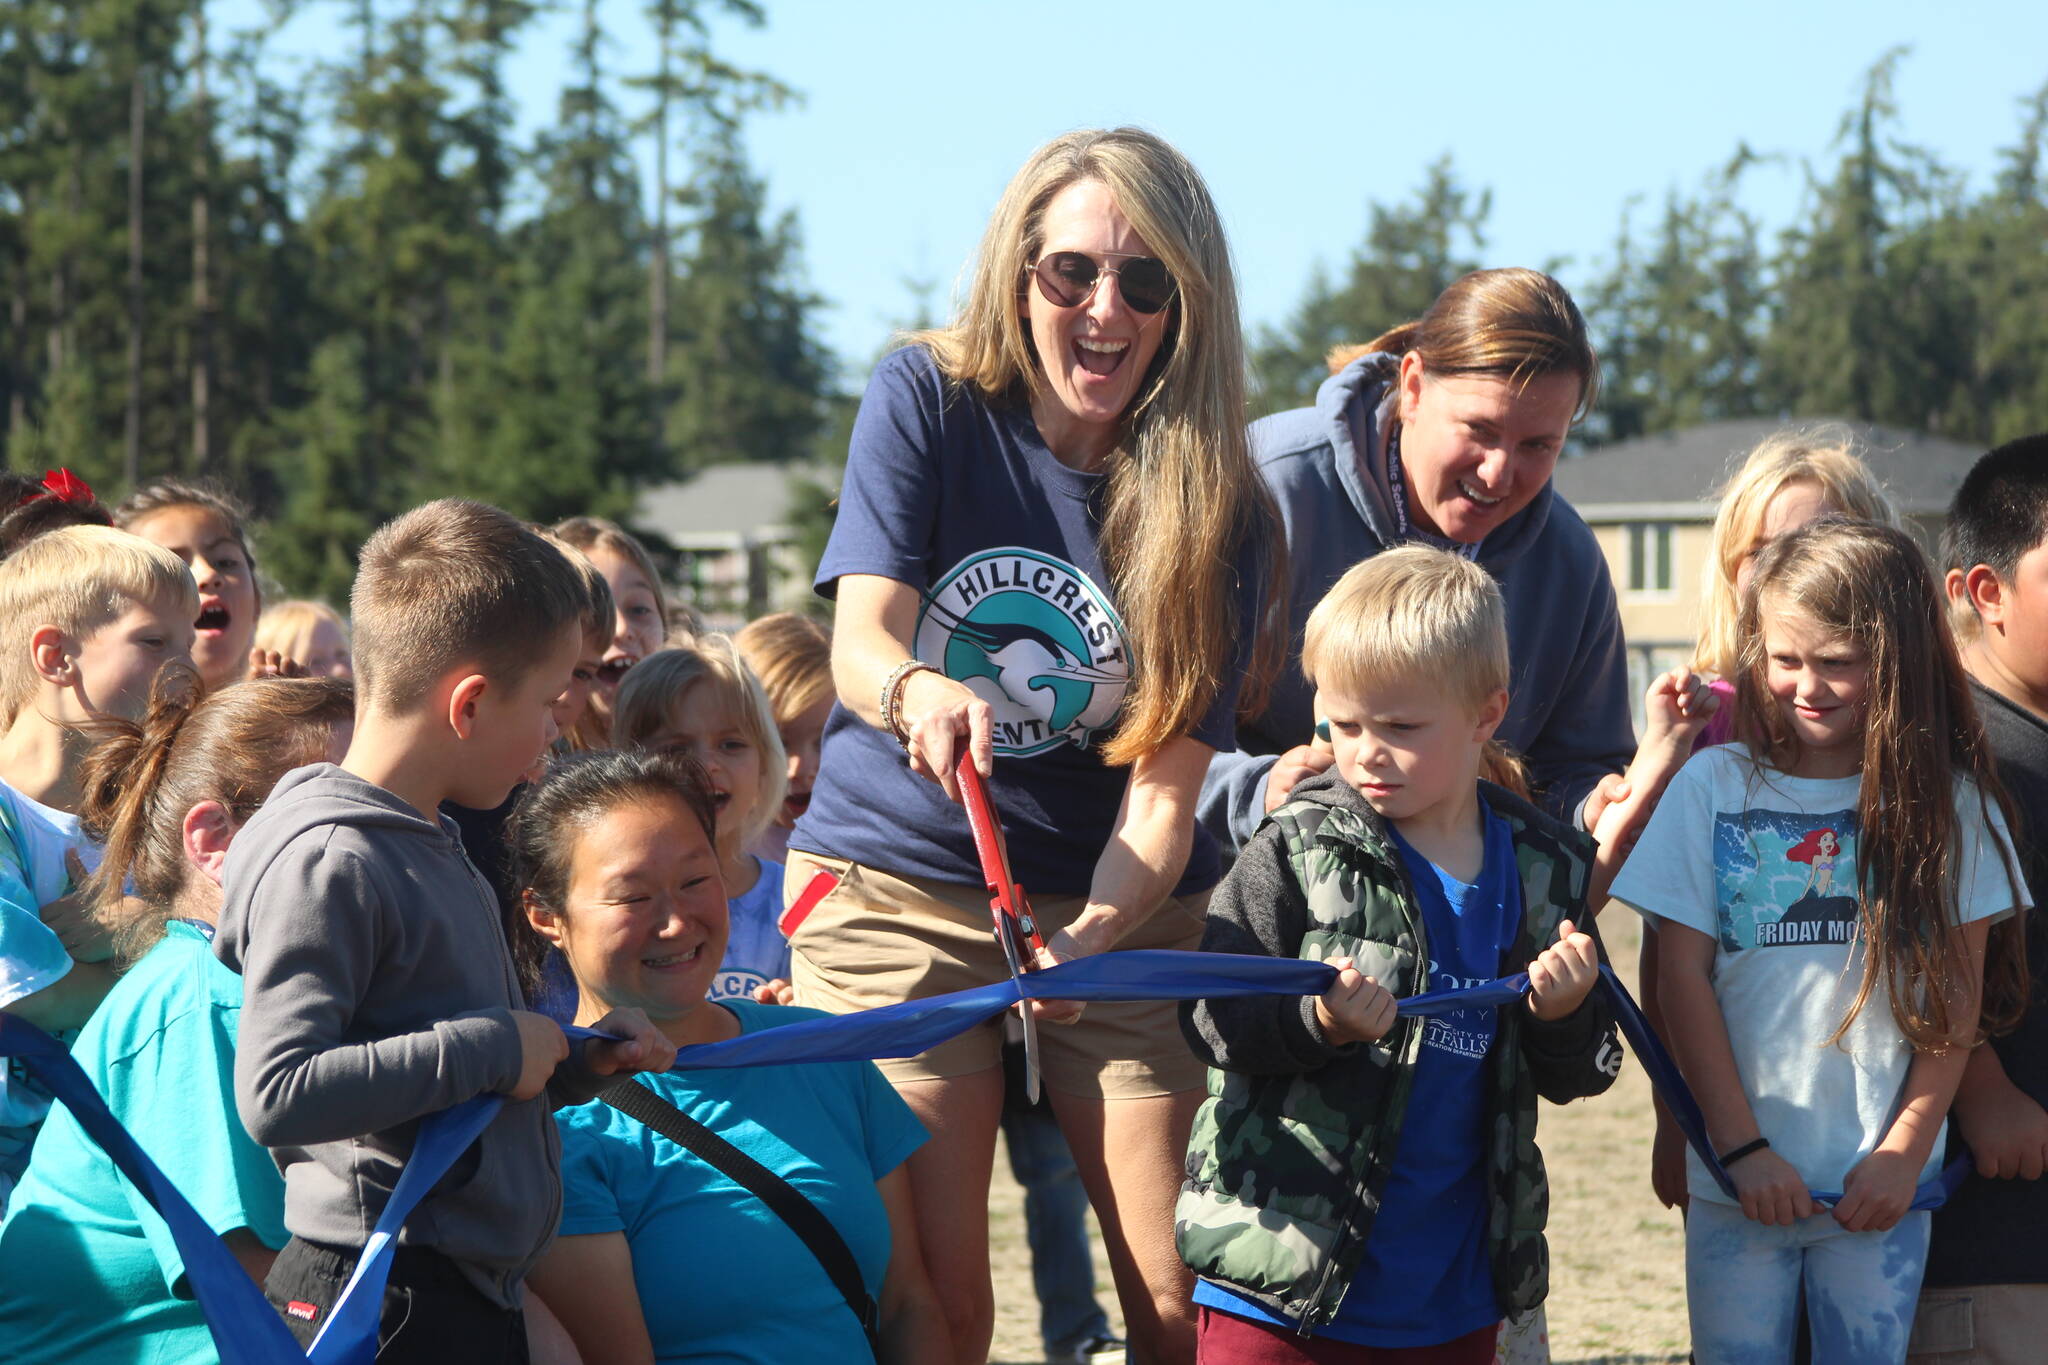 Photo by Karina Andrew/Whidbey News-Times
Hillcrest Elementary School President Samantha Horrobin cuts the ribbon at the opening of the newly paved walking path Sept. 15.